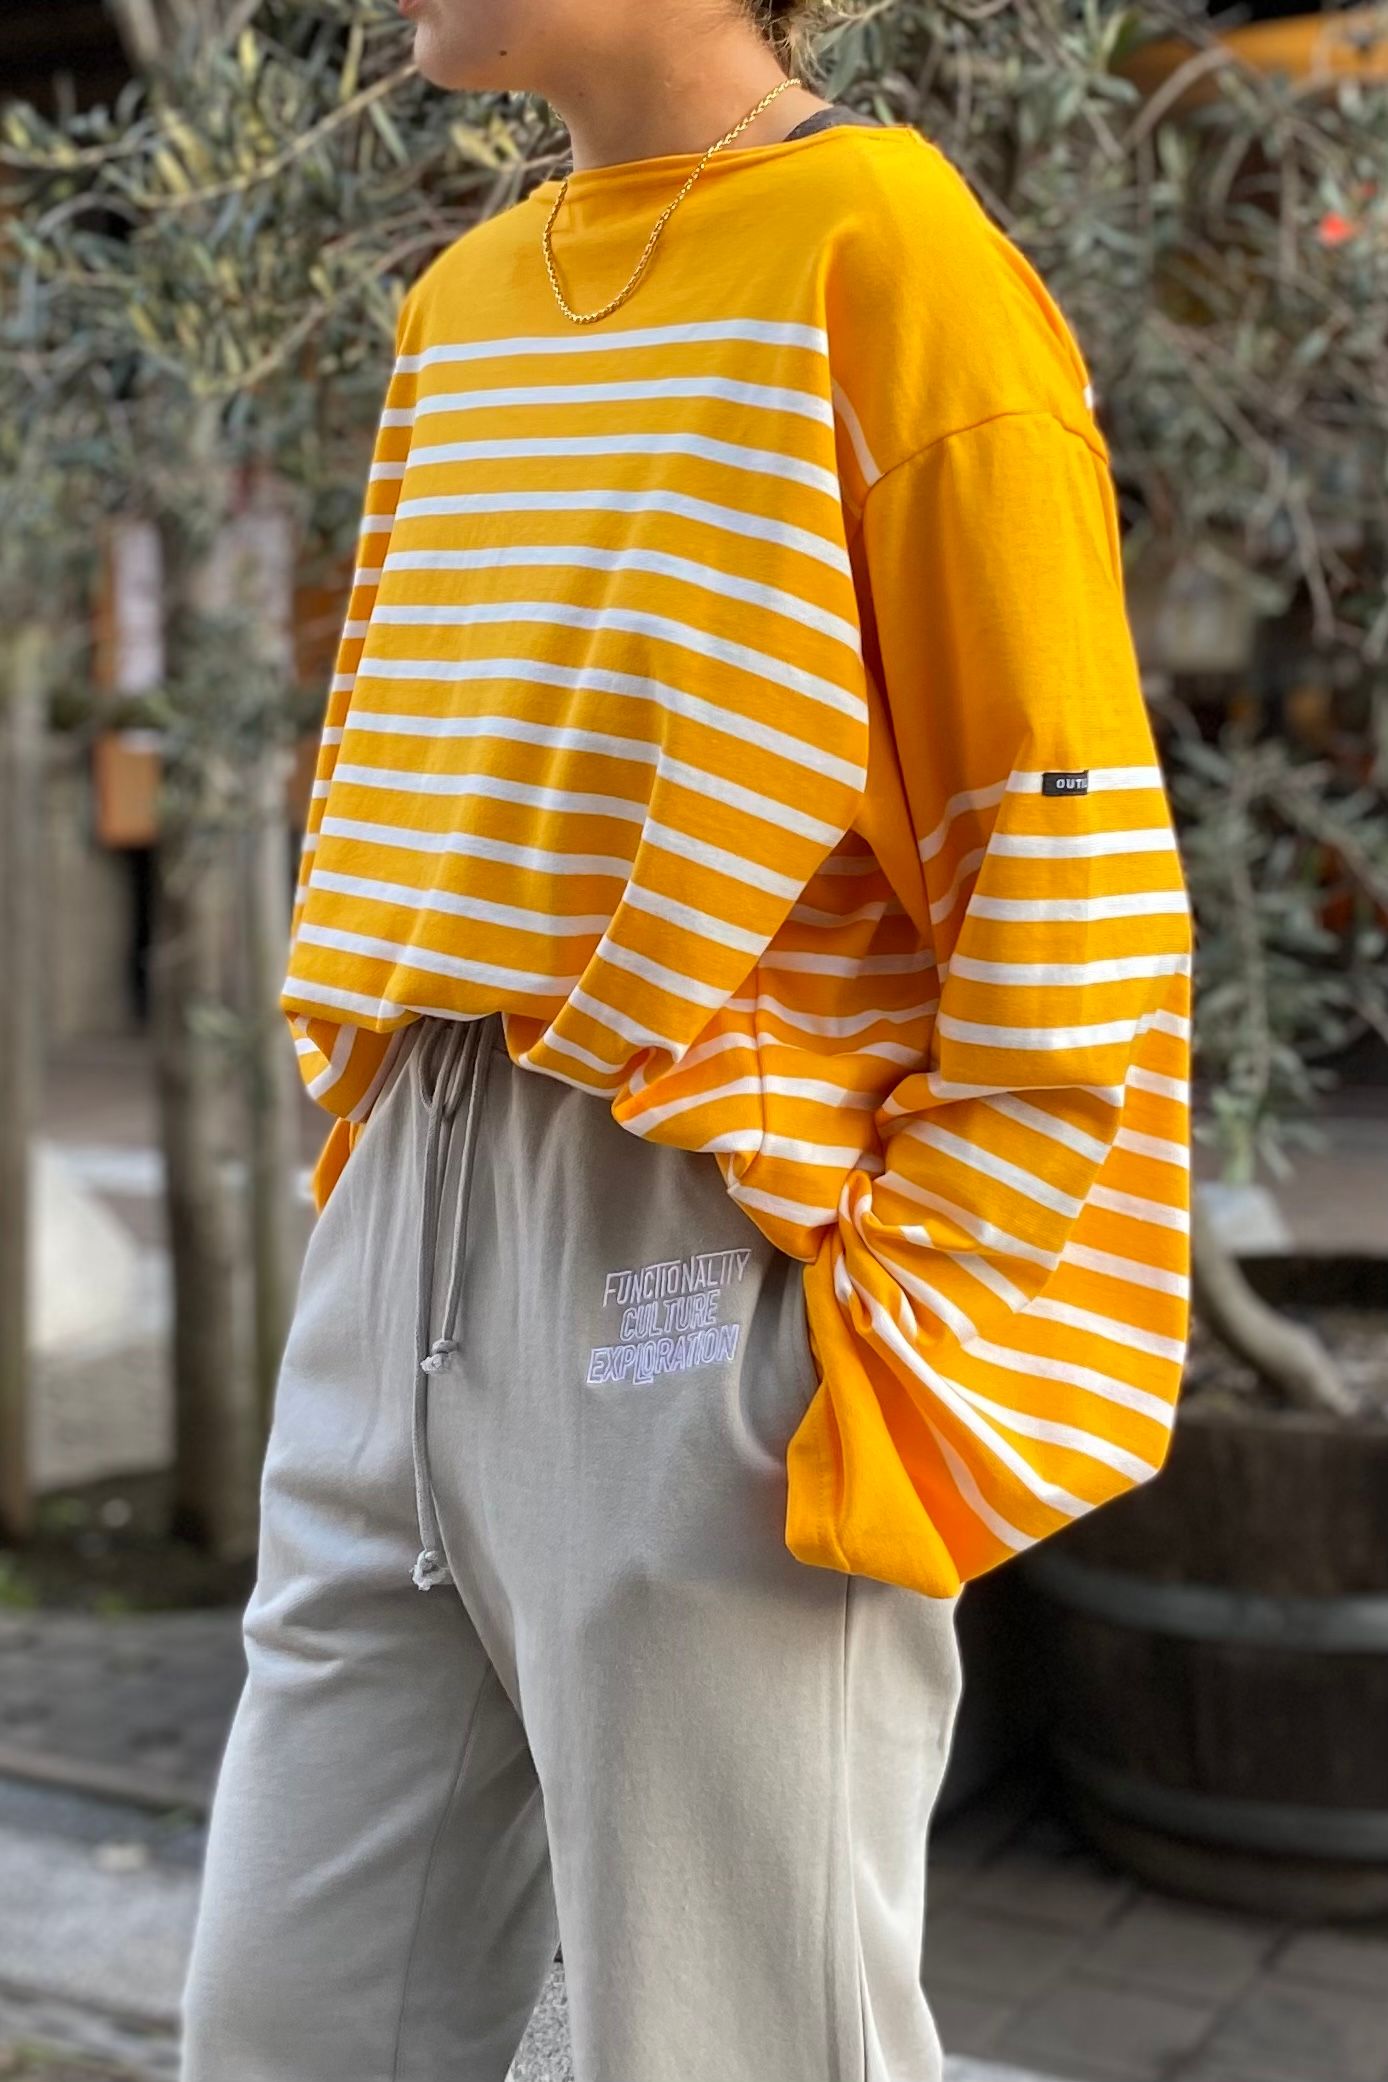 OUTIL - バスクシャツ/tricot aast -bright marigold/off- 23ss unisex